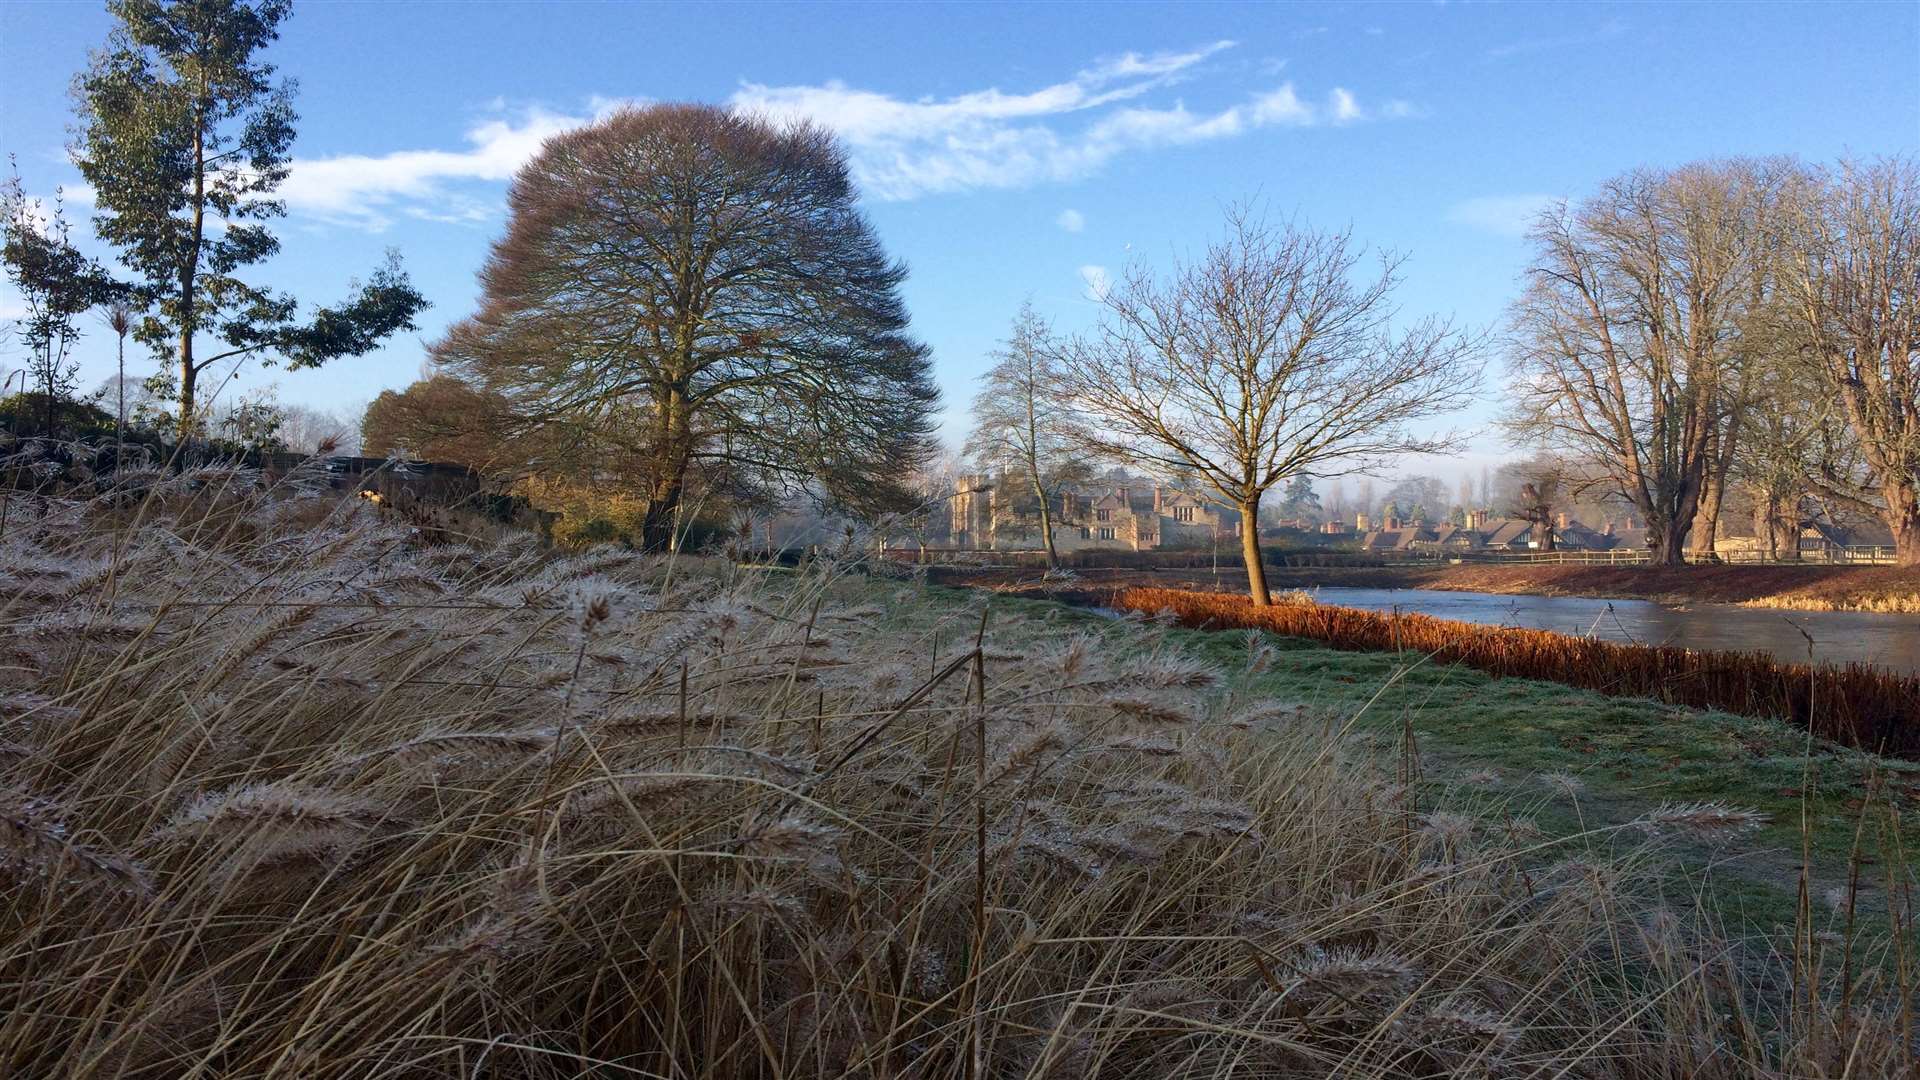 Get along and see the beauty of the reeds at Hever